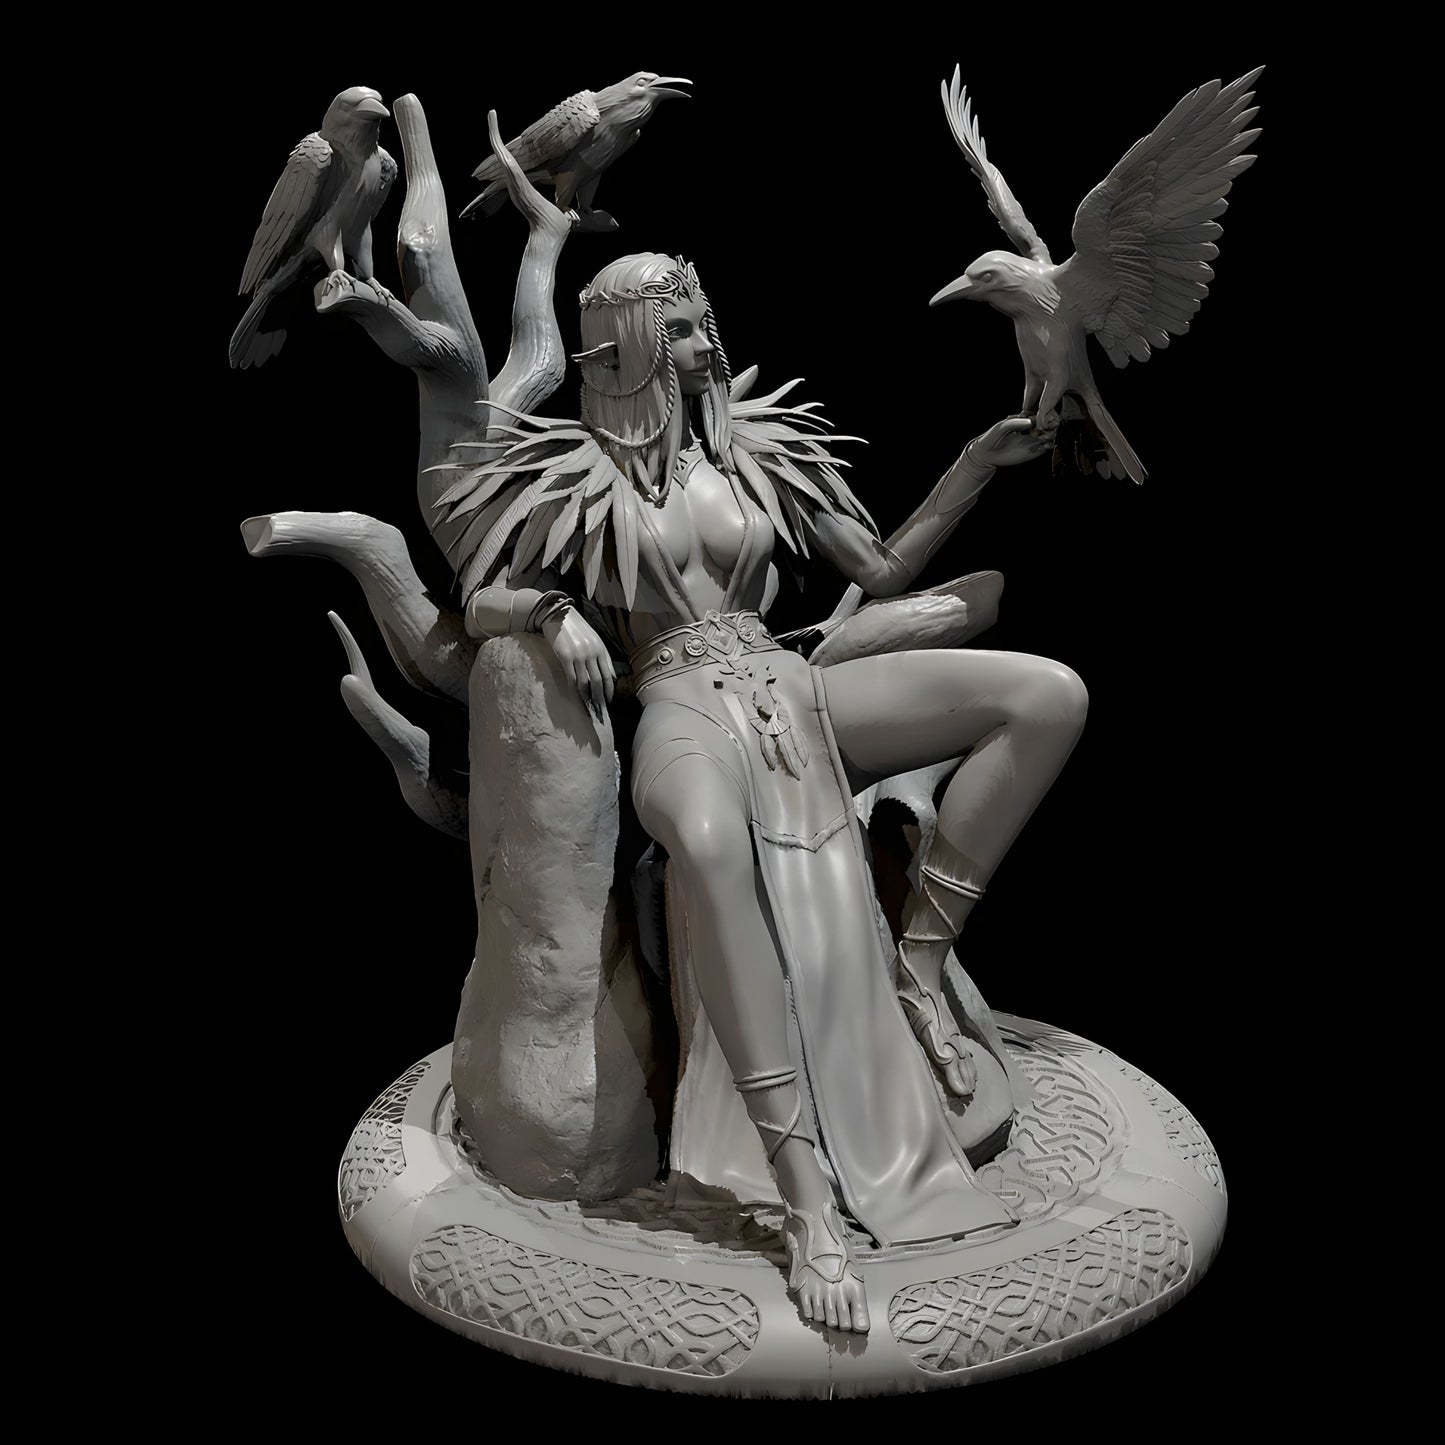 18+ Collector's 3D Printed Model: The height of man 25mm 45mm 65mm Resin model kits figure beauty colorless and self-assembled （3D Printing).